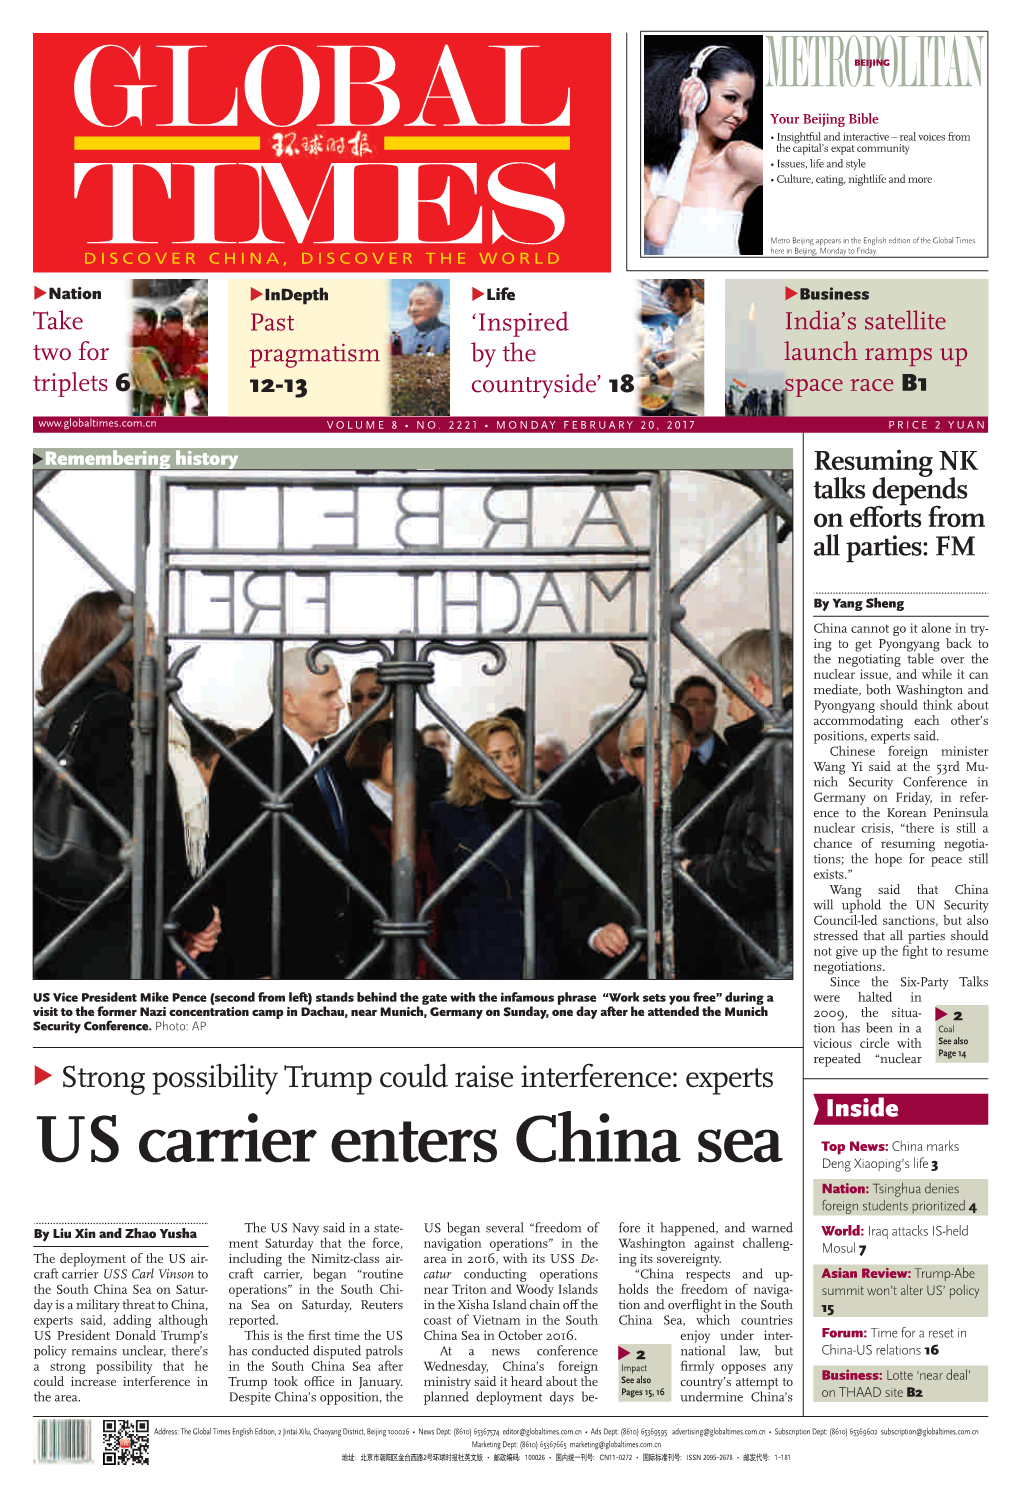 US Carrier Enters China Sea Deng Xiaoping’S Life 3 Nation: Tsinghua Denies Foreign Students Prioritized 4